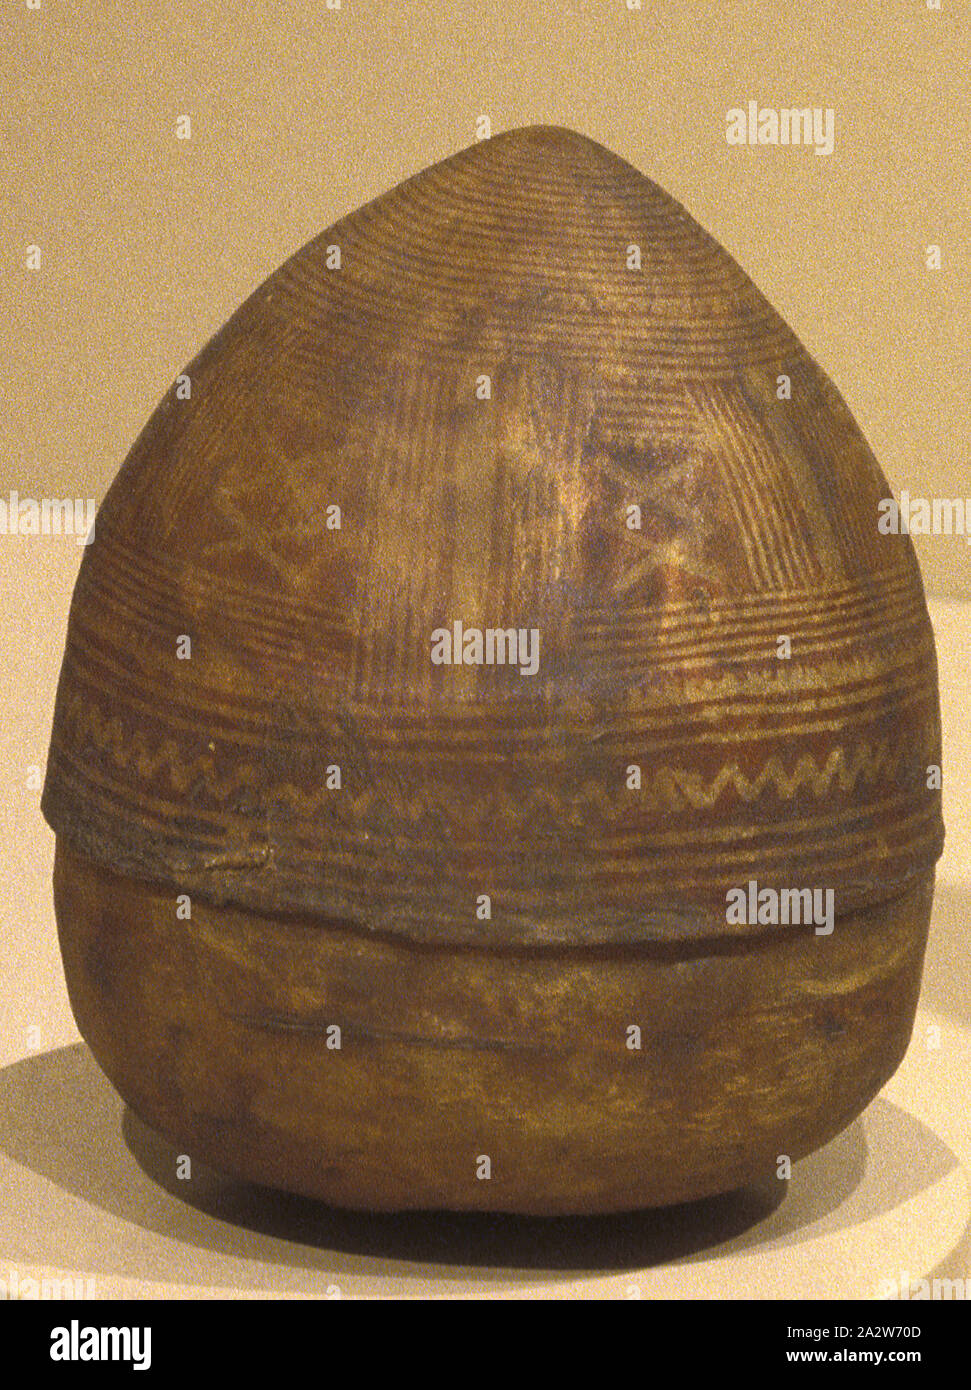 spice container, Unknown, 1901-1997, hide, pigment, 5-1/2 x 4-7/8 x 4-3/4 in., African Art Stock Photo